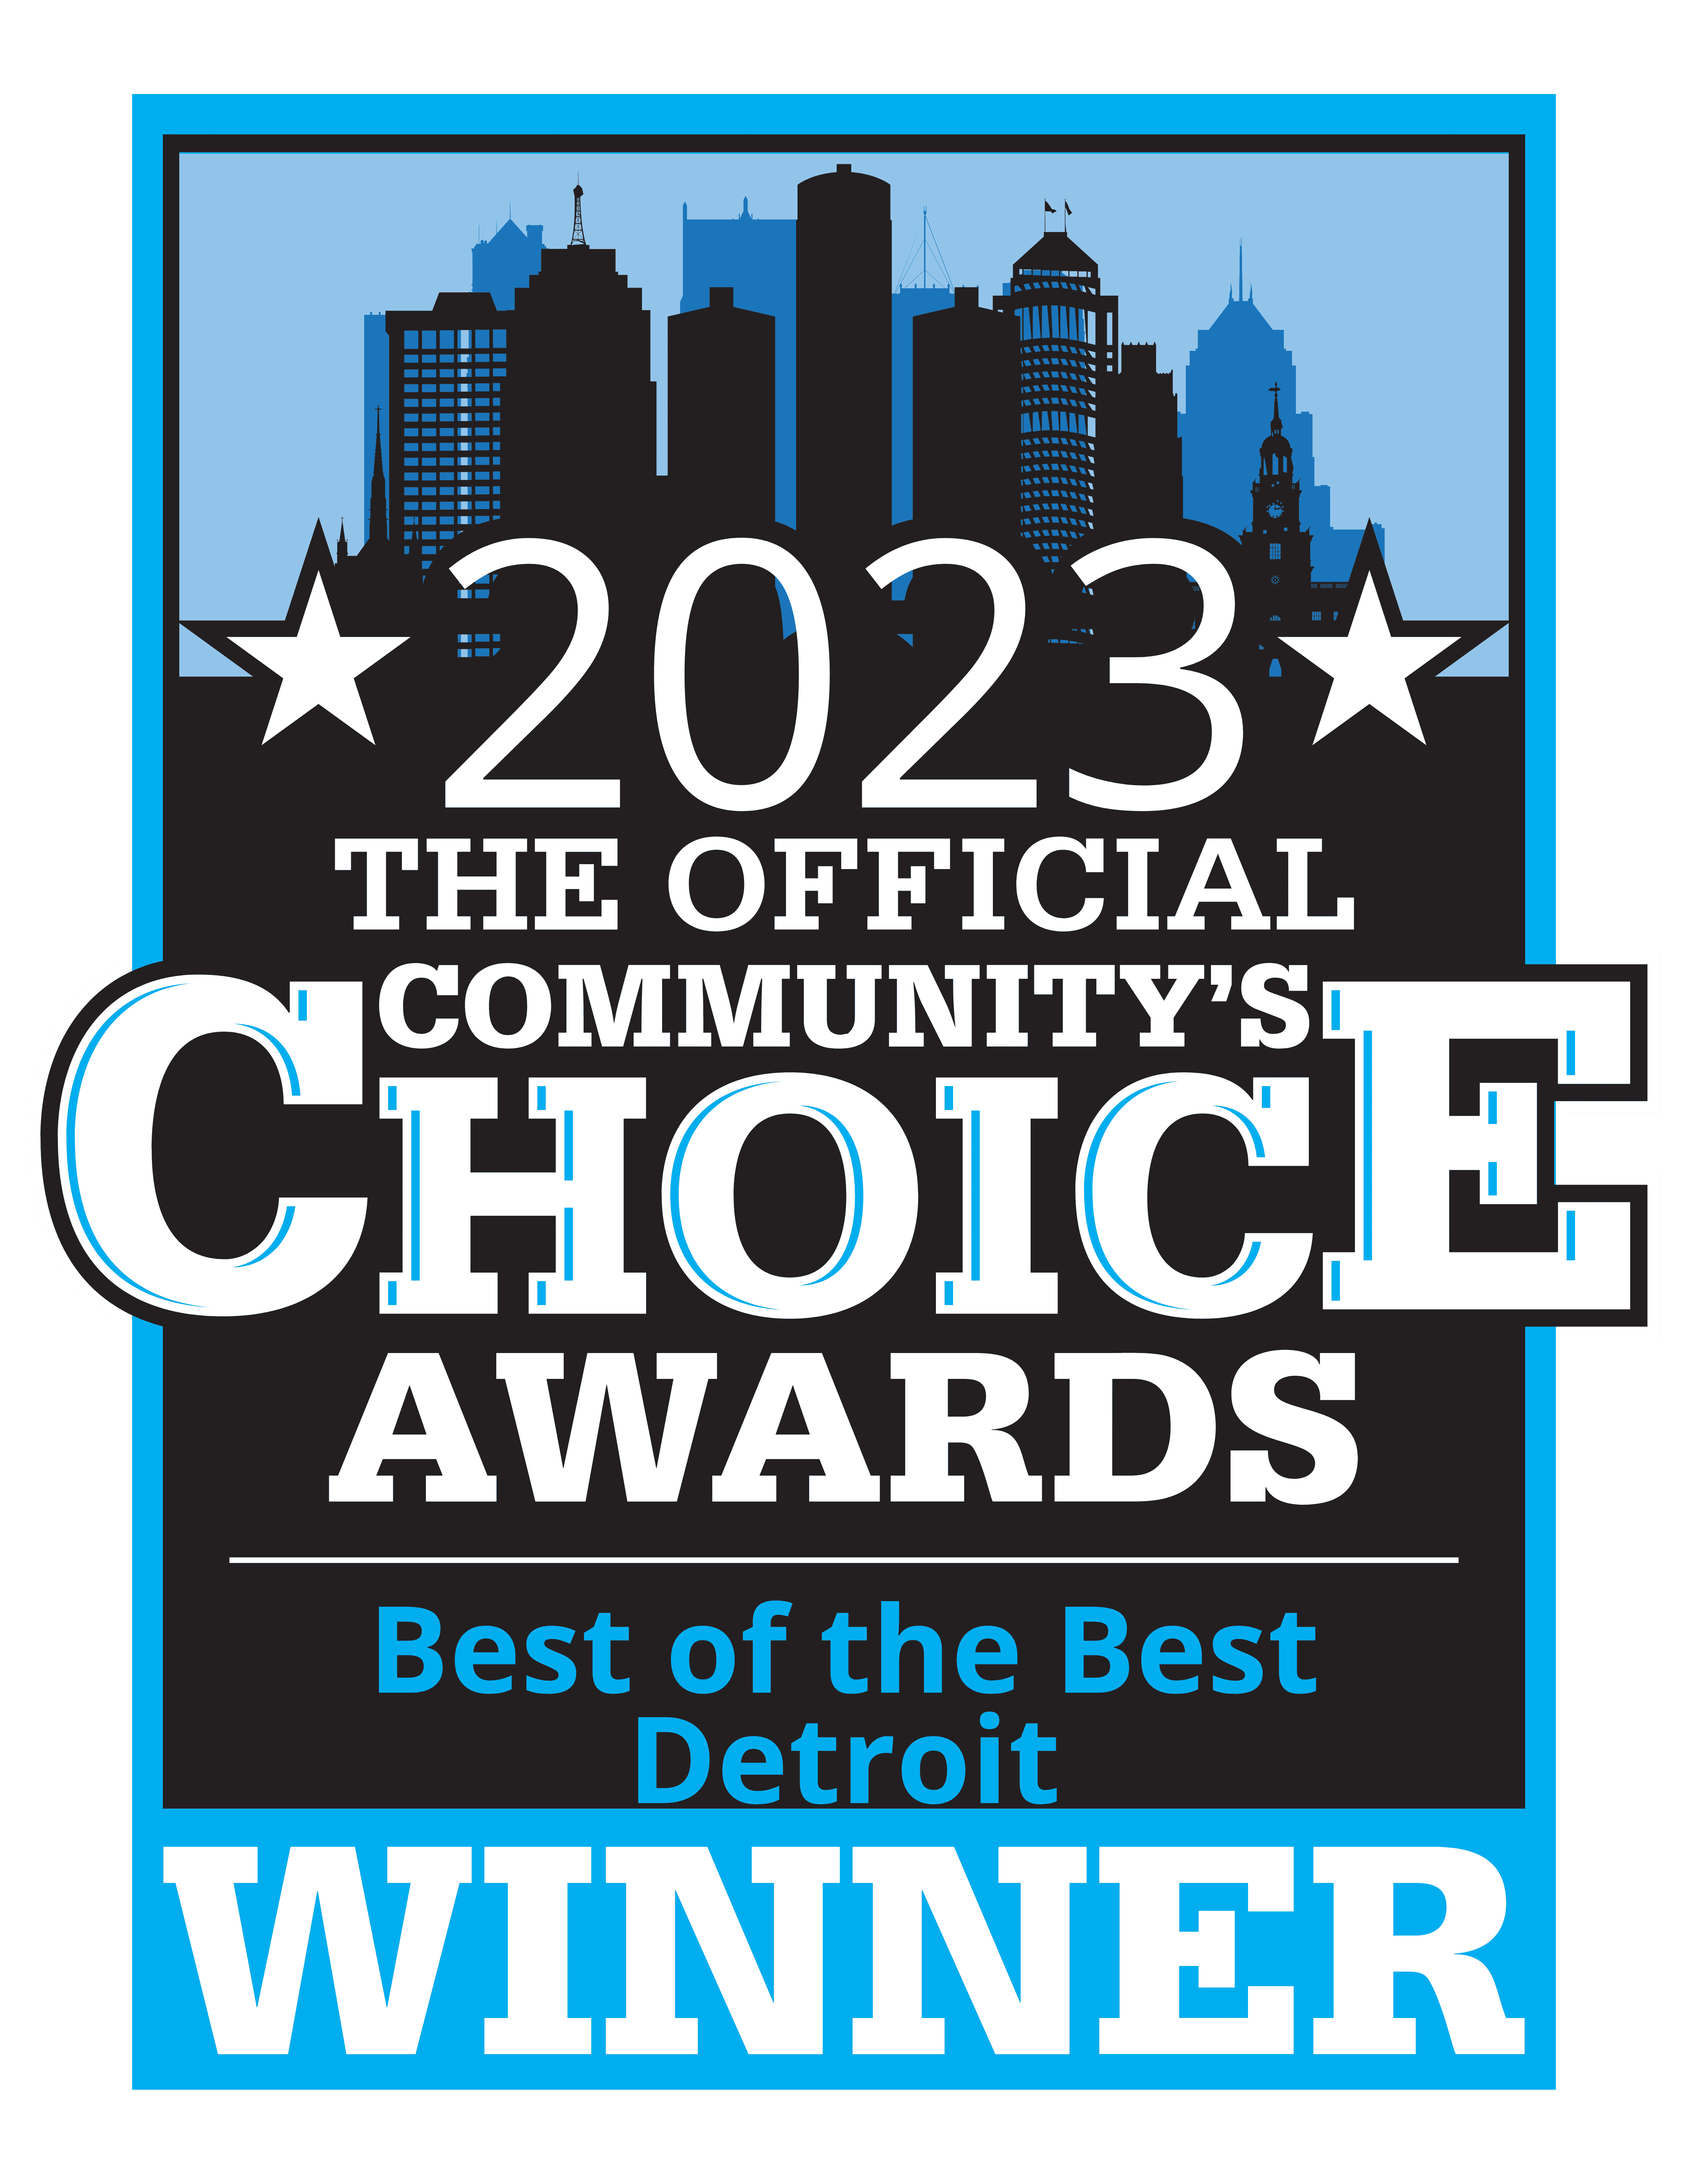 Logo for the “2023 The Official Community’s Choice Awards” with a city skyline backdrop, titled “Best of the Best Detroit” and marked as “Winner.” This distinguished logo serves as a container for community excellence.